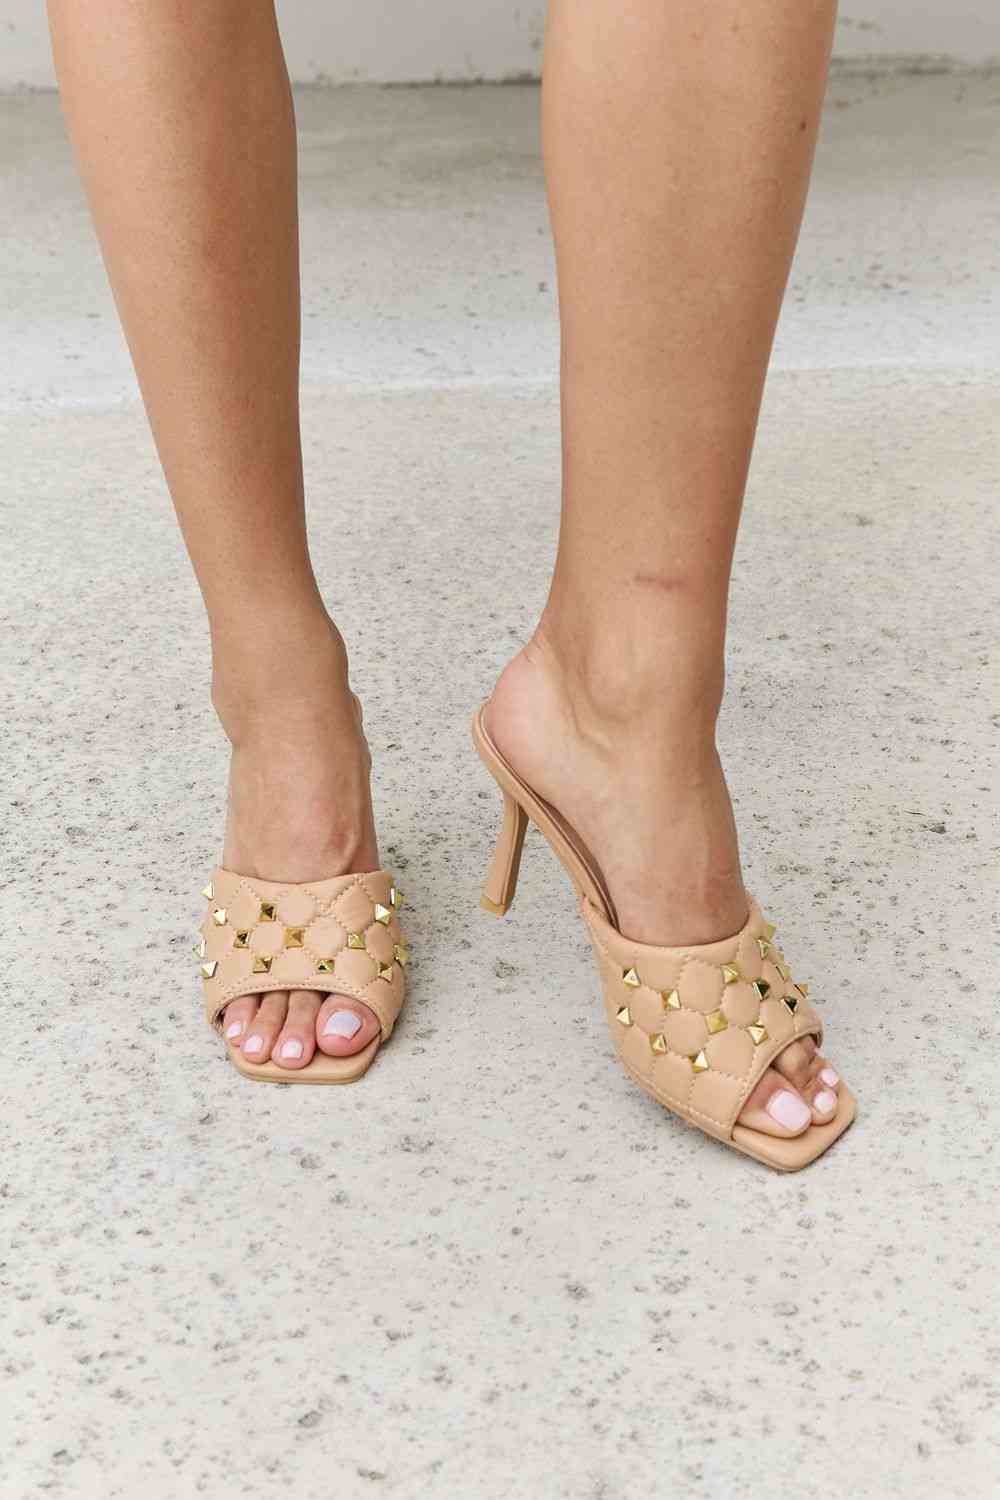 Square Toe Quilted Mule Heels in Nude - Beige / 6 - Accessories - Shoes - 1 - 2024